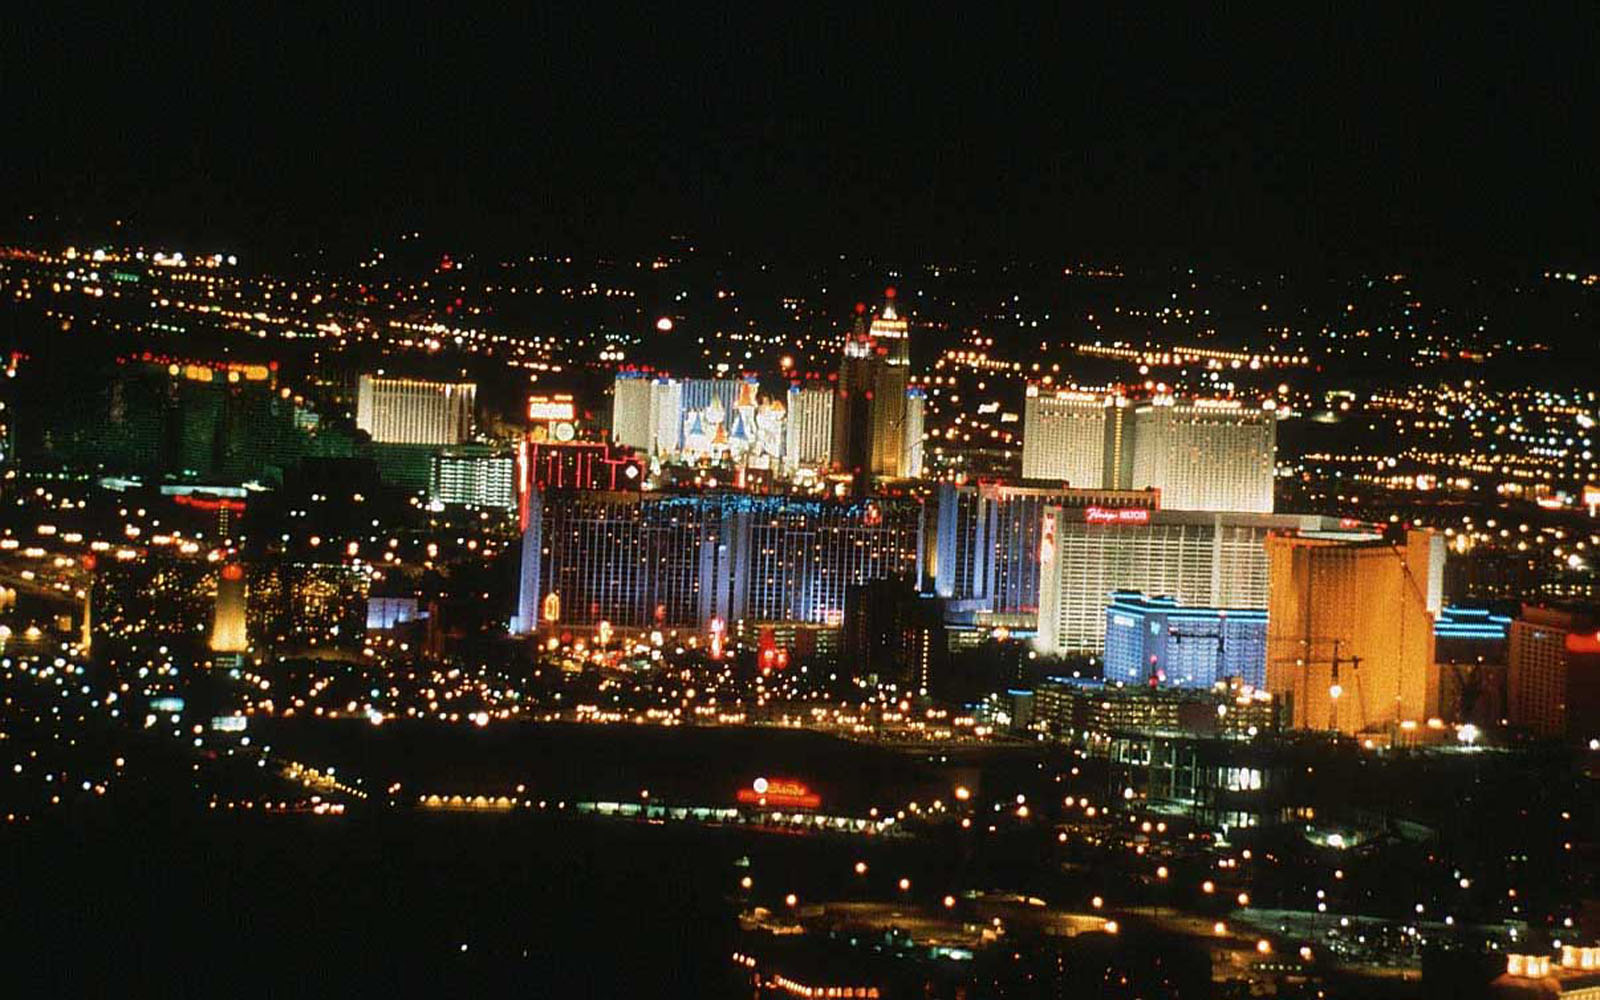 Tag Las Vegas Wallpaper Background Photos Image And Pictures For